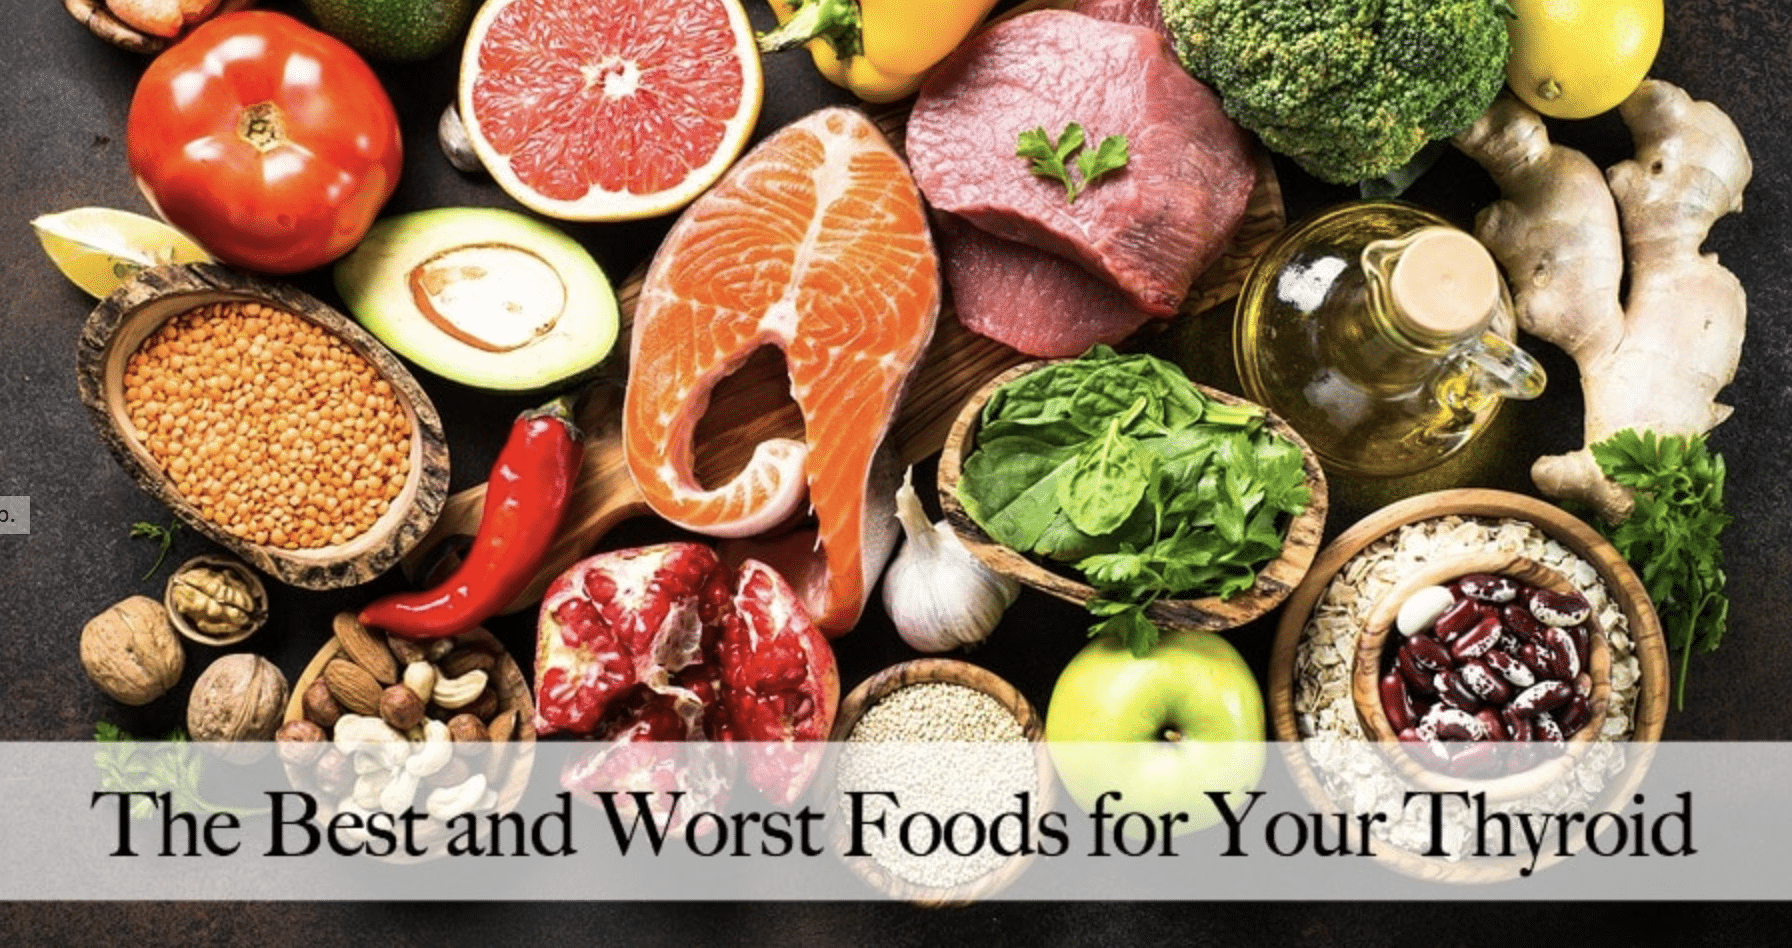 what diet is best for hypothyroidism?